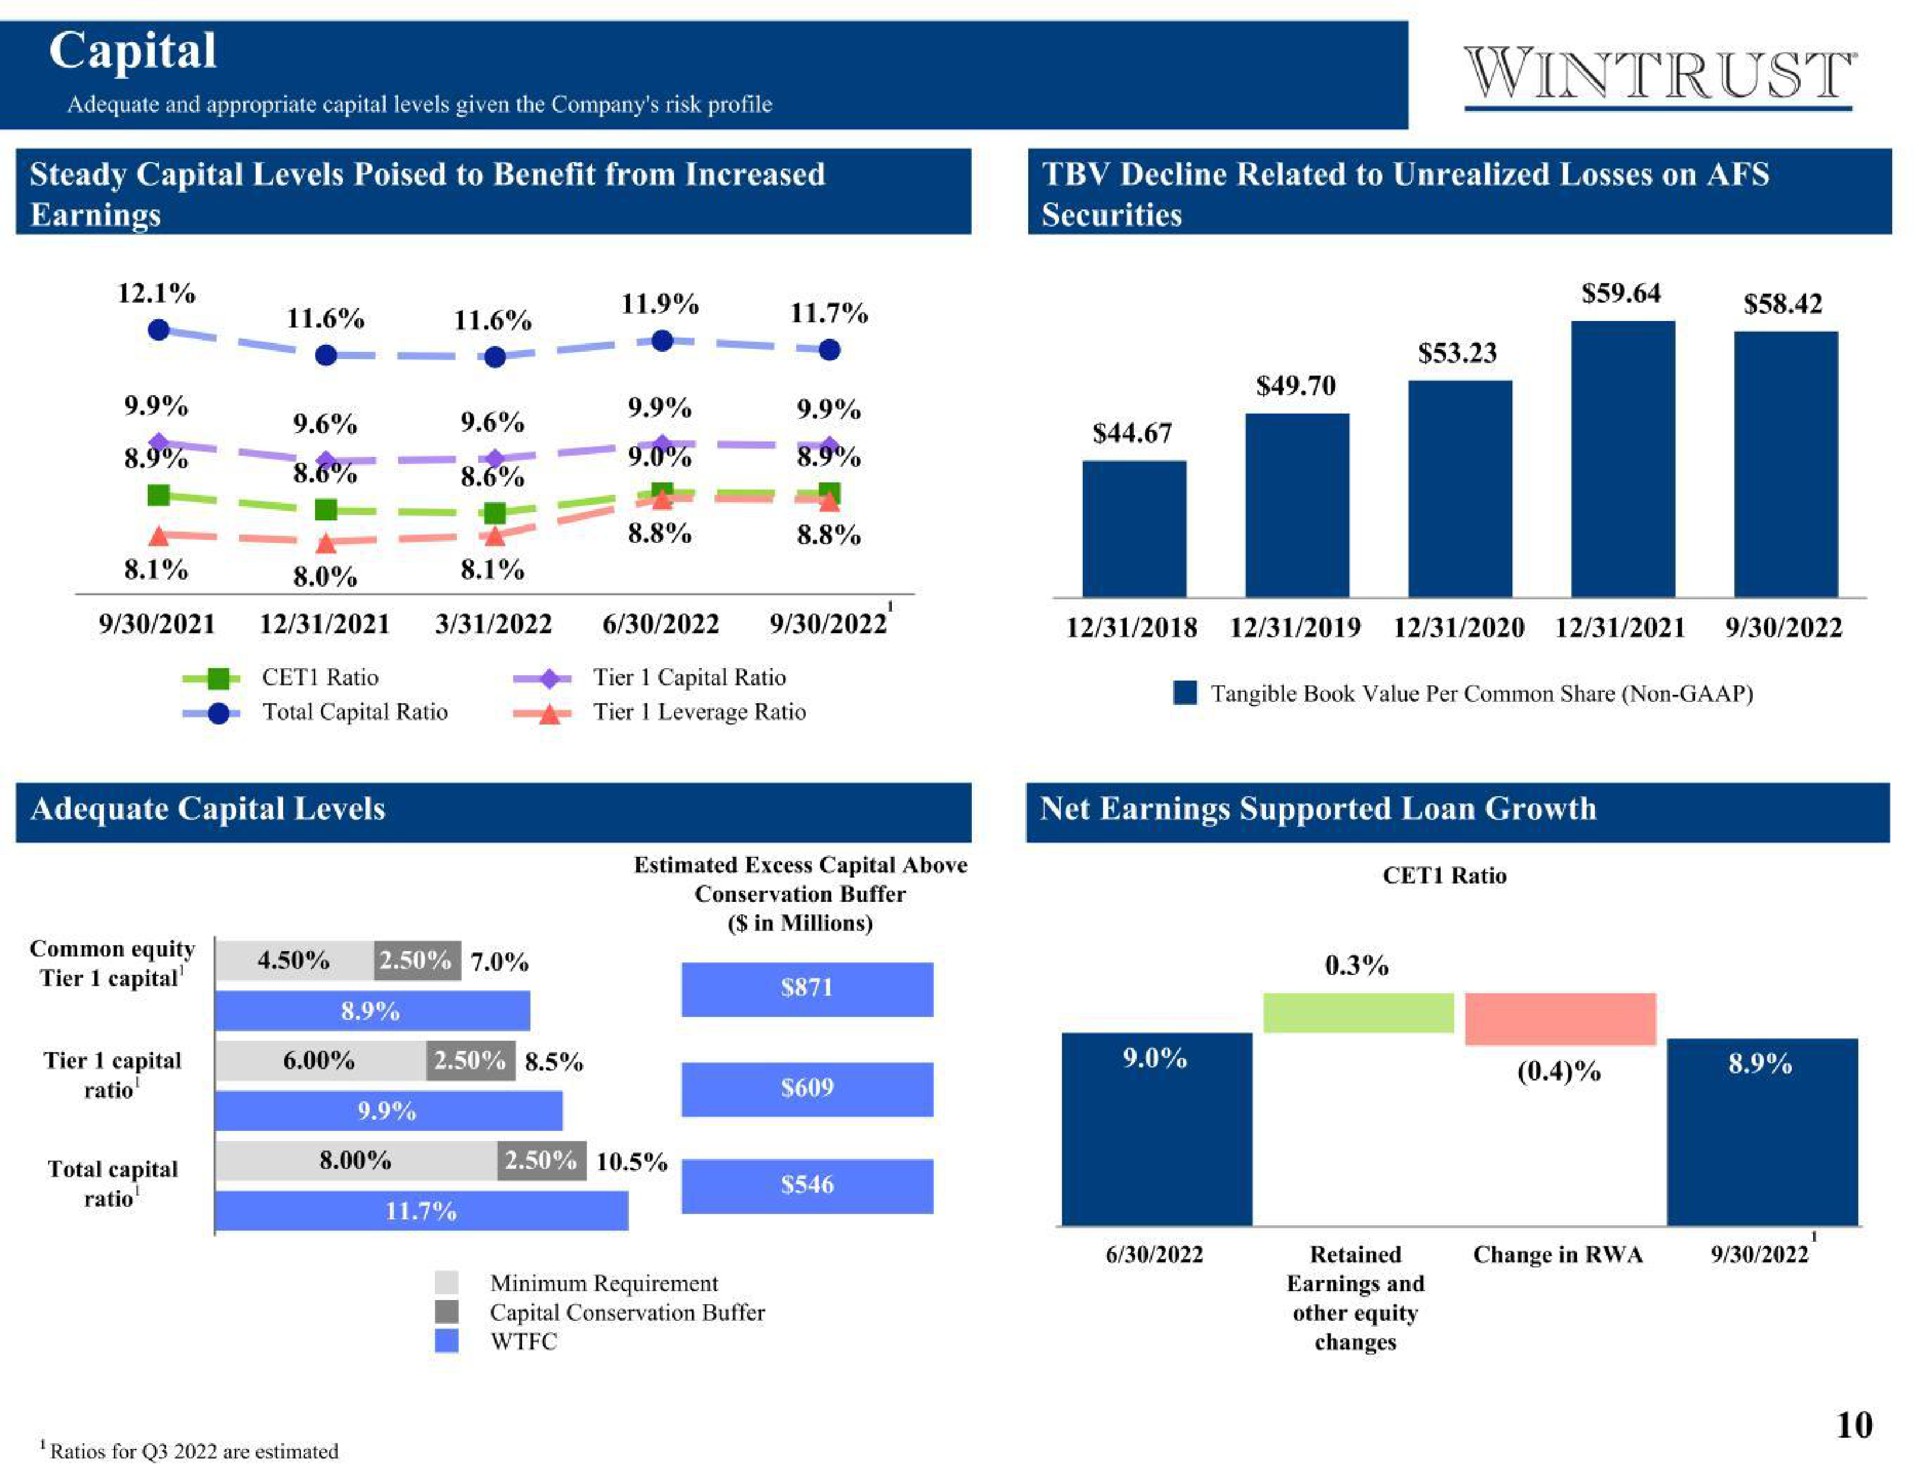 capital steady capital levels poised to benefit from increased oes a i adequate capital levels net earnings supported loan growth tier capital ratio ratio in millions rel | Wintrust Financial